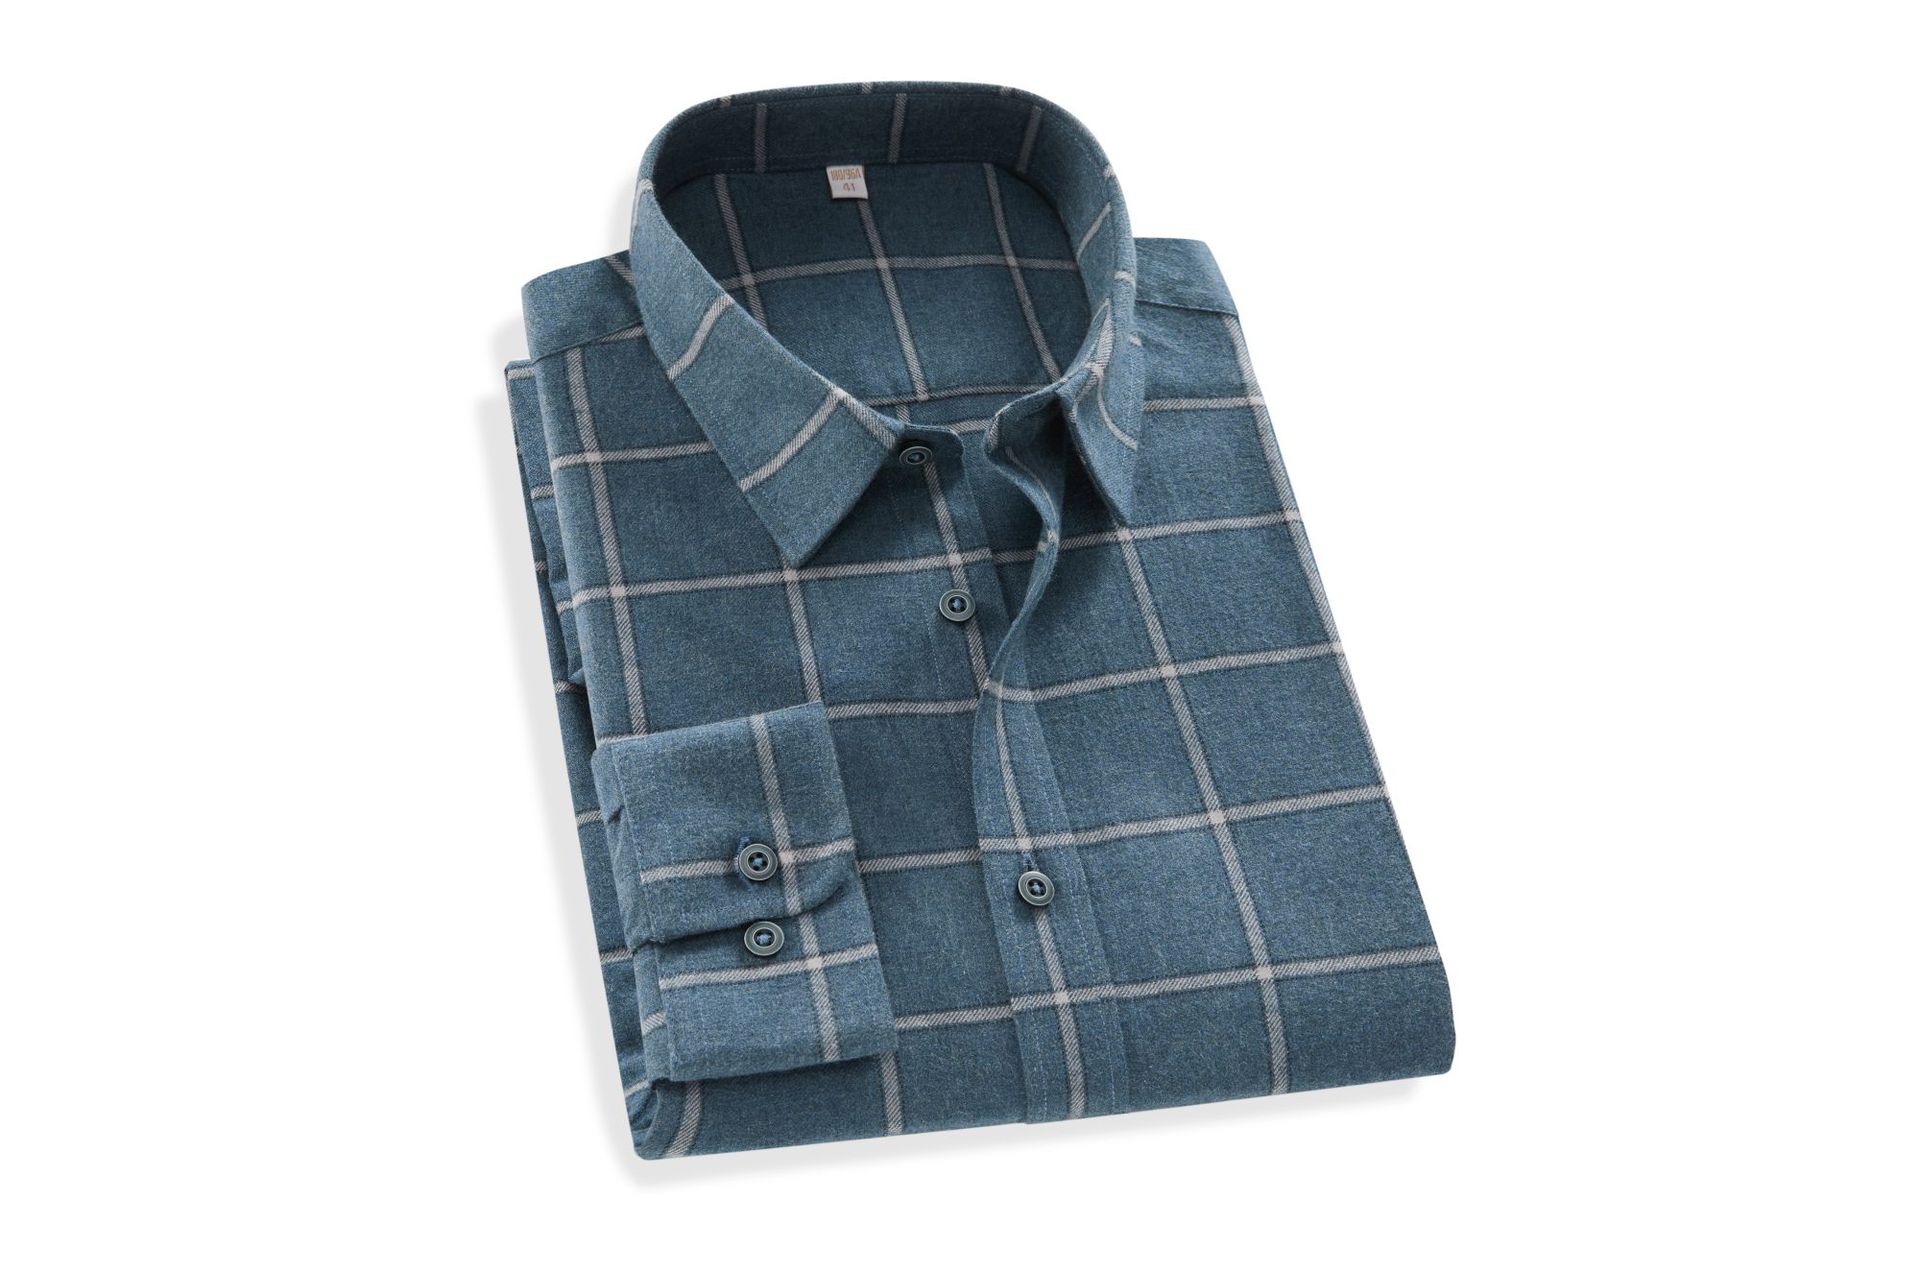 Export to North America Foreign Trade Casual Men's Shirts Cotton Shirt Men's Long-Sleeved Plaid Shirt Workplace Clothing